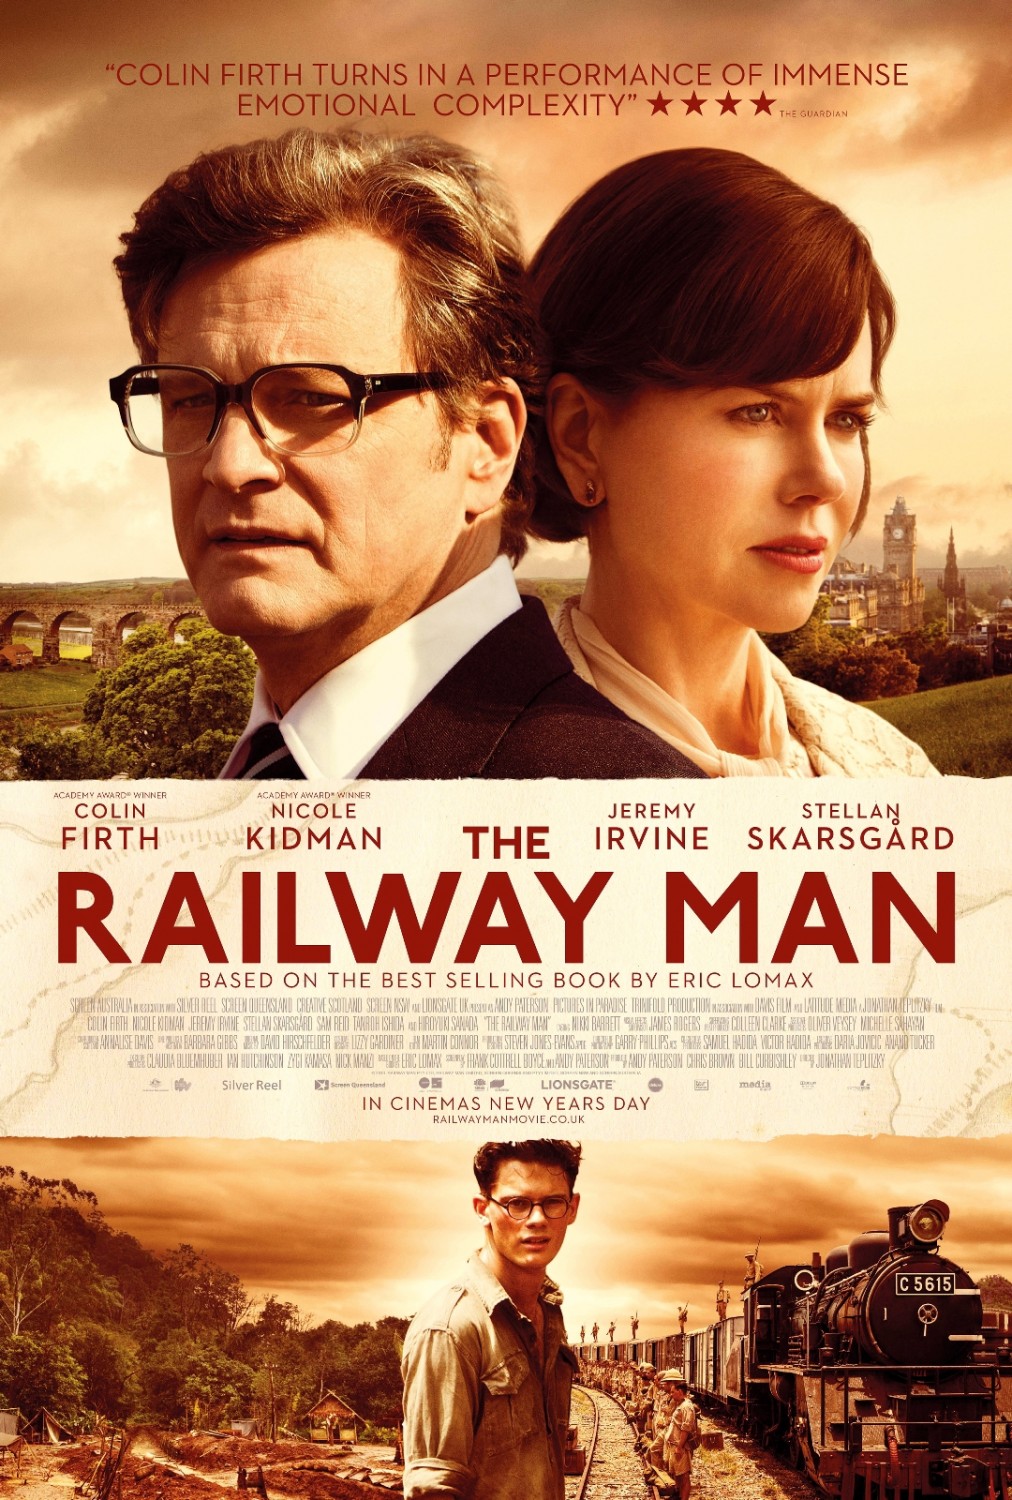 Megaworld Lifestyle Malls Exclusively Screens The Railway Man, A Movie of Heroism and True Love